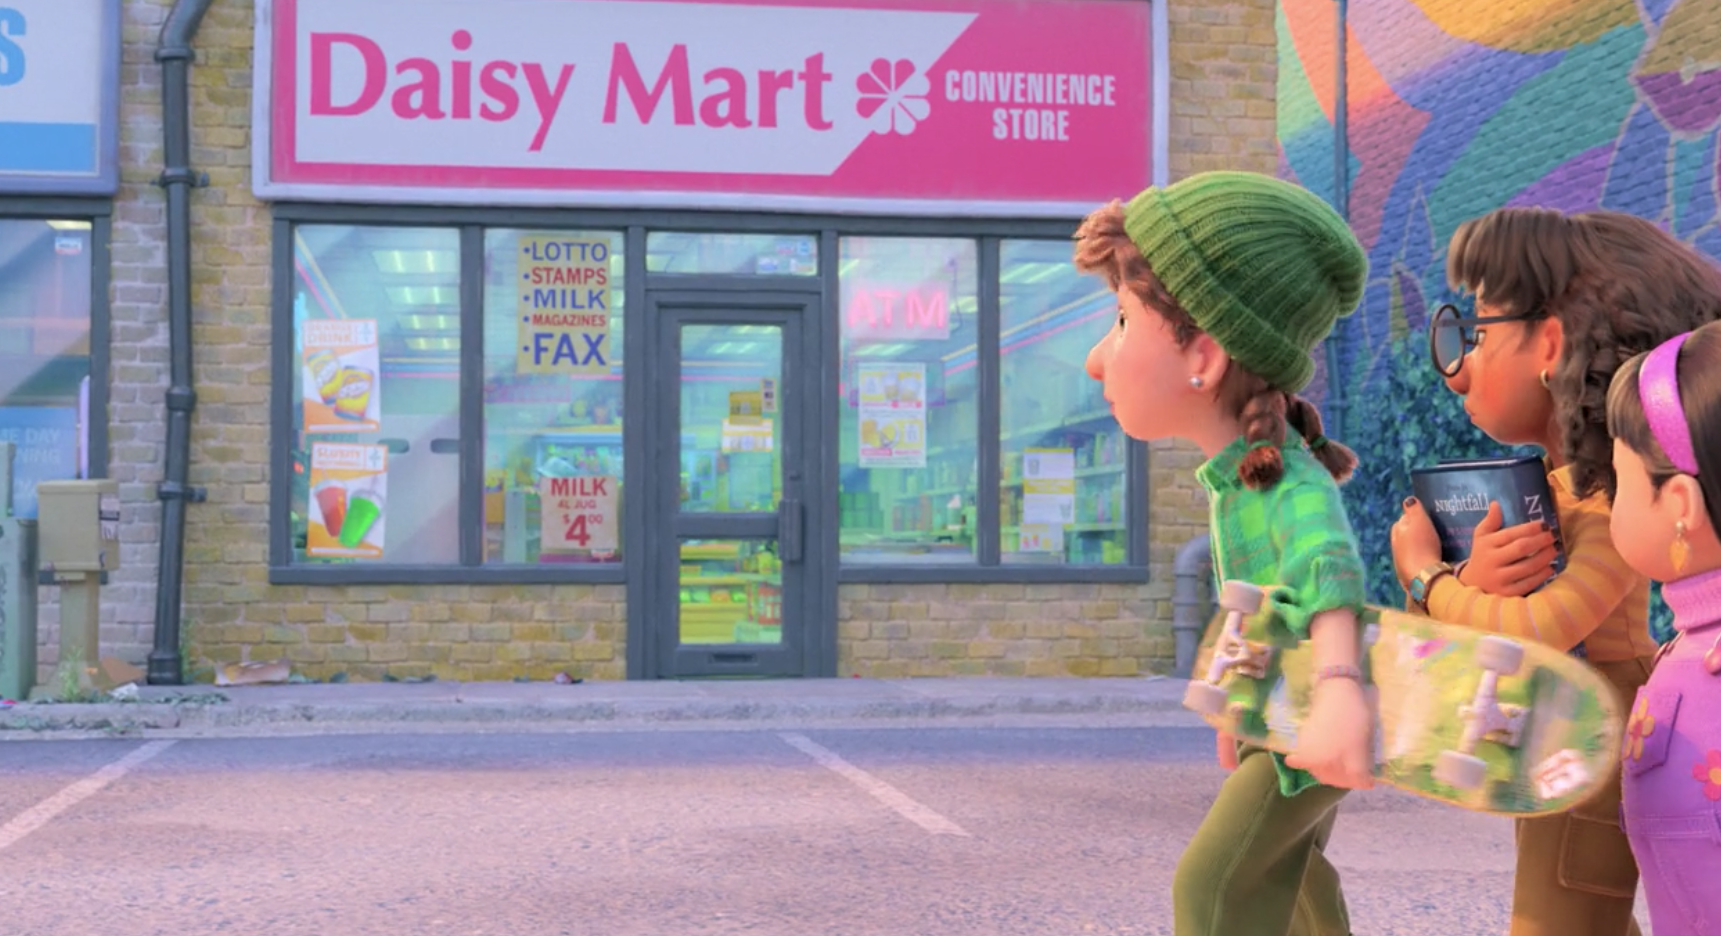 Girls in the film walk by a Daisy Mart convenience store